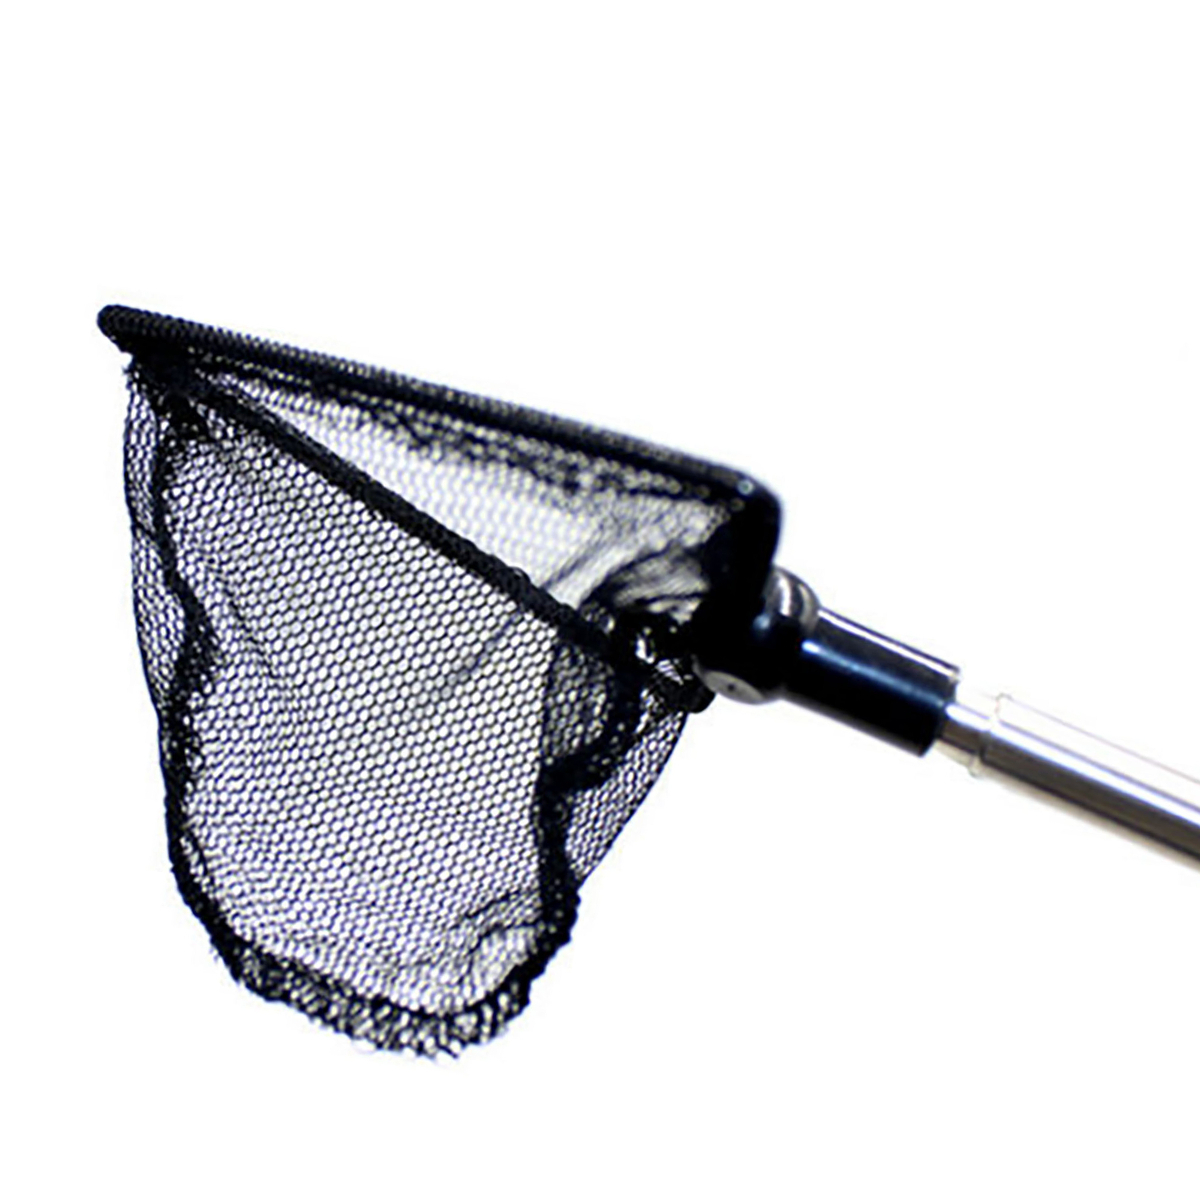 Fish Net Small Triangle Buy Aquarium Cleaning Products